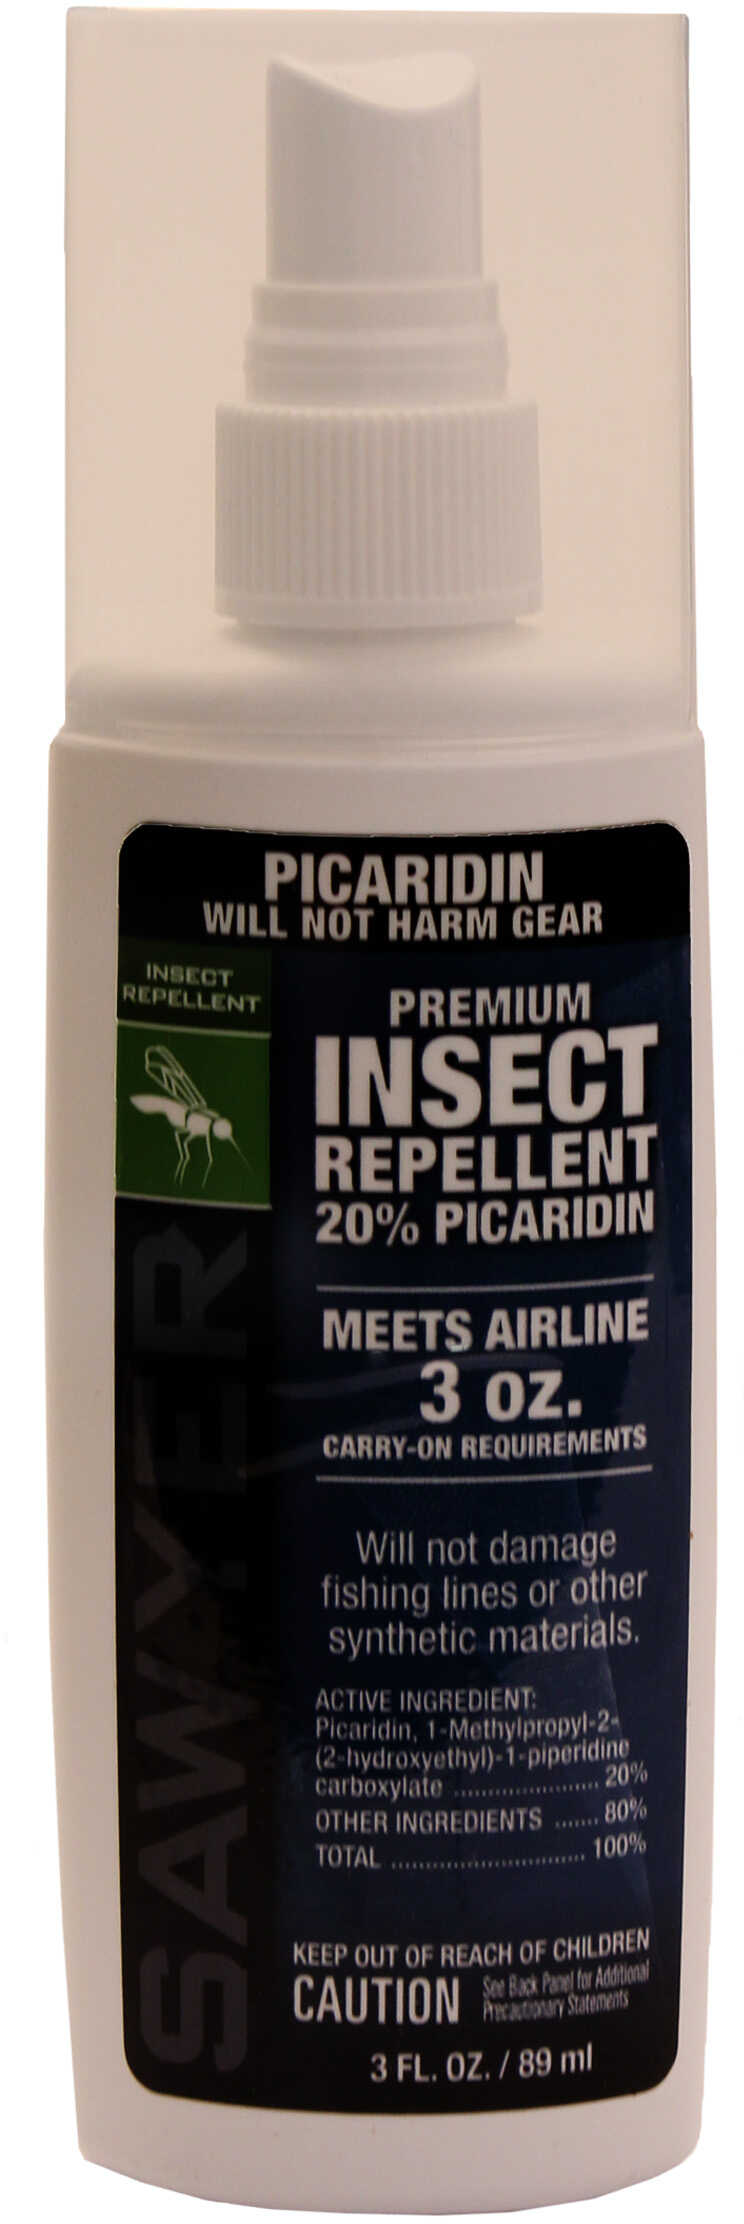 Sawyer INSECT Repellent PICARIDAN FISHERMANS Form 3Oz